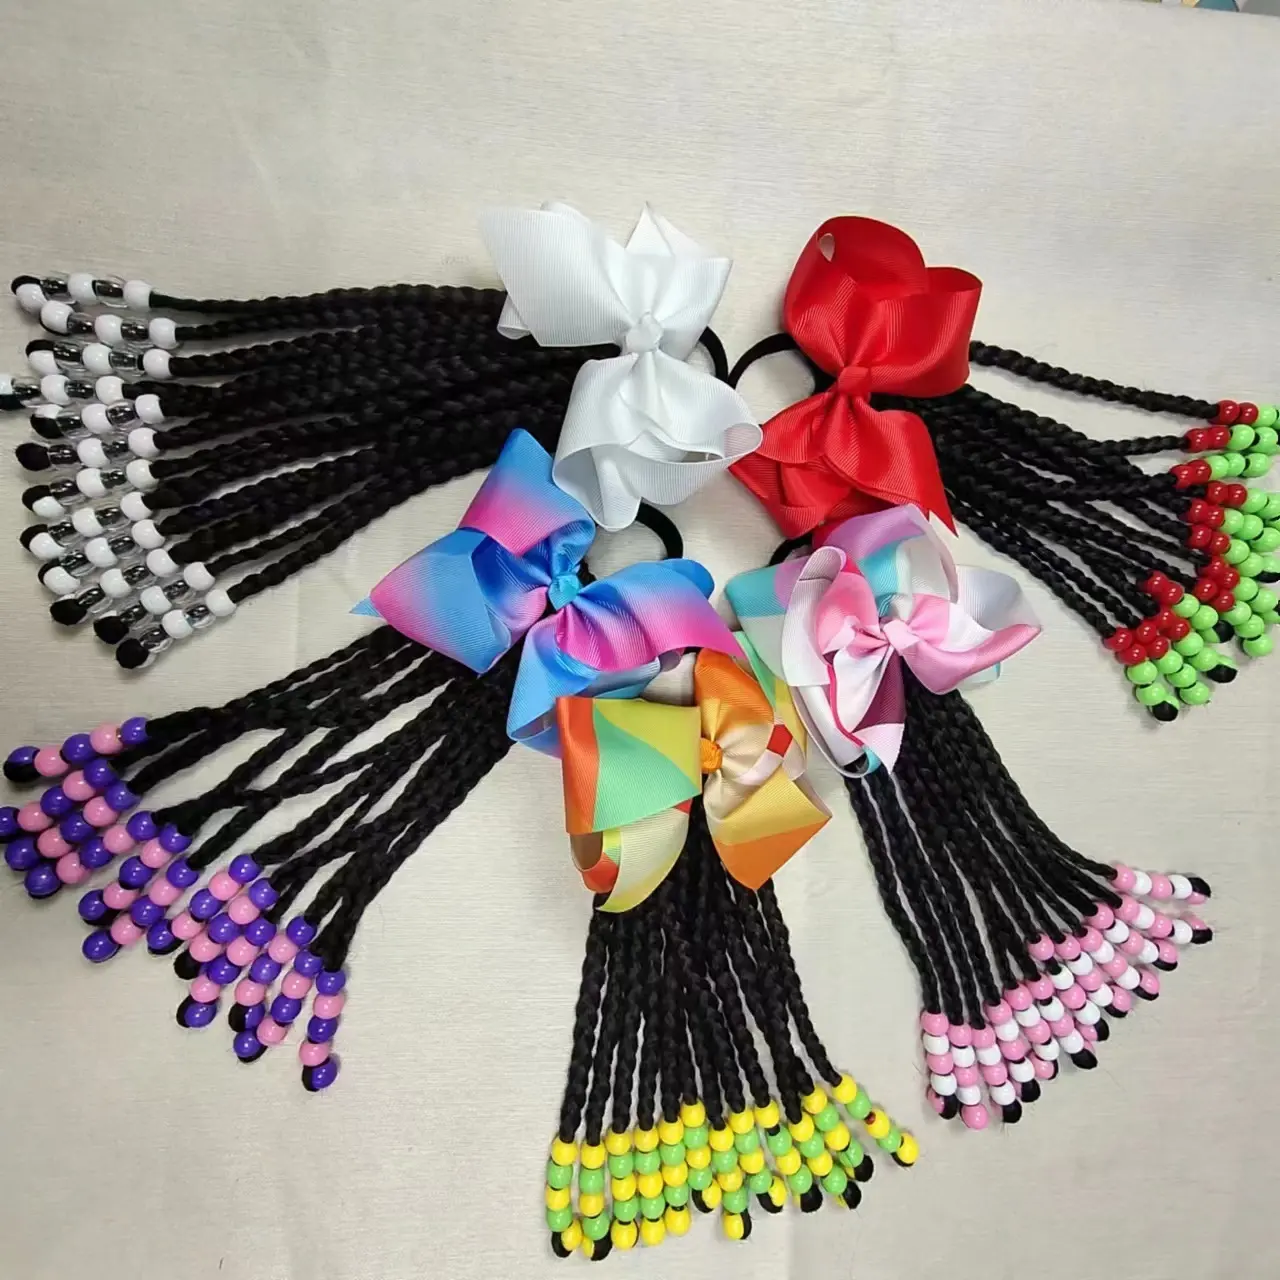 MYSURE hair accessories decoration for kids braids girls bows kids hair accessory kids crochet hair beads and bow